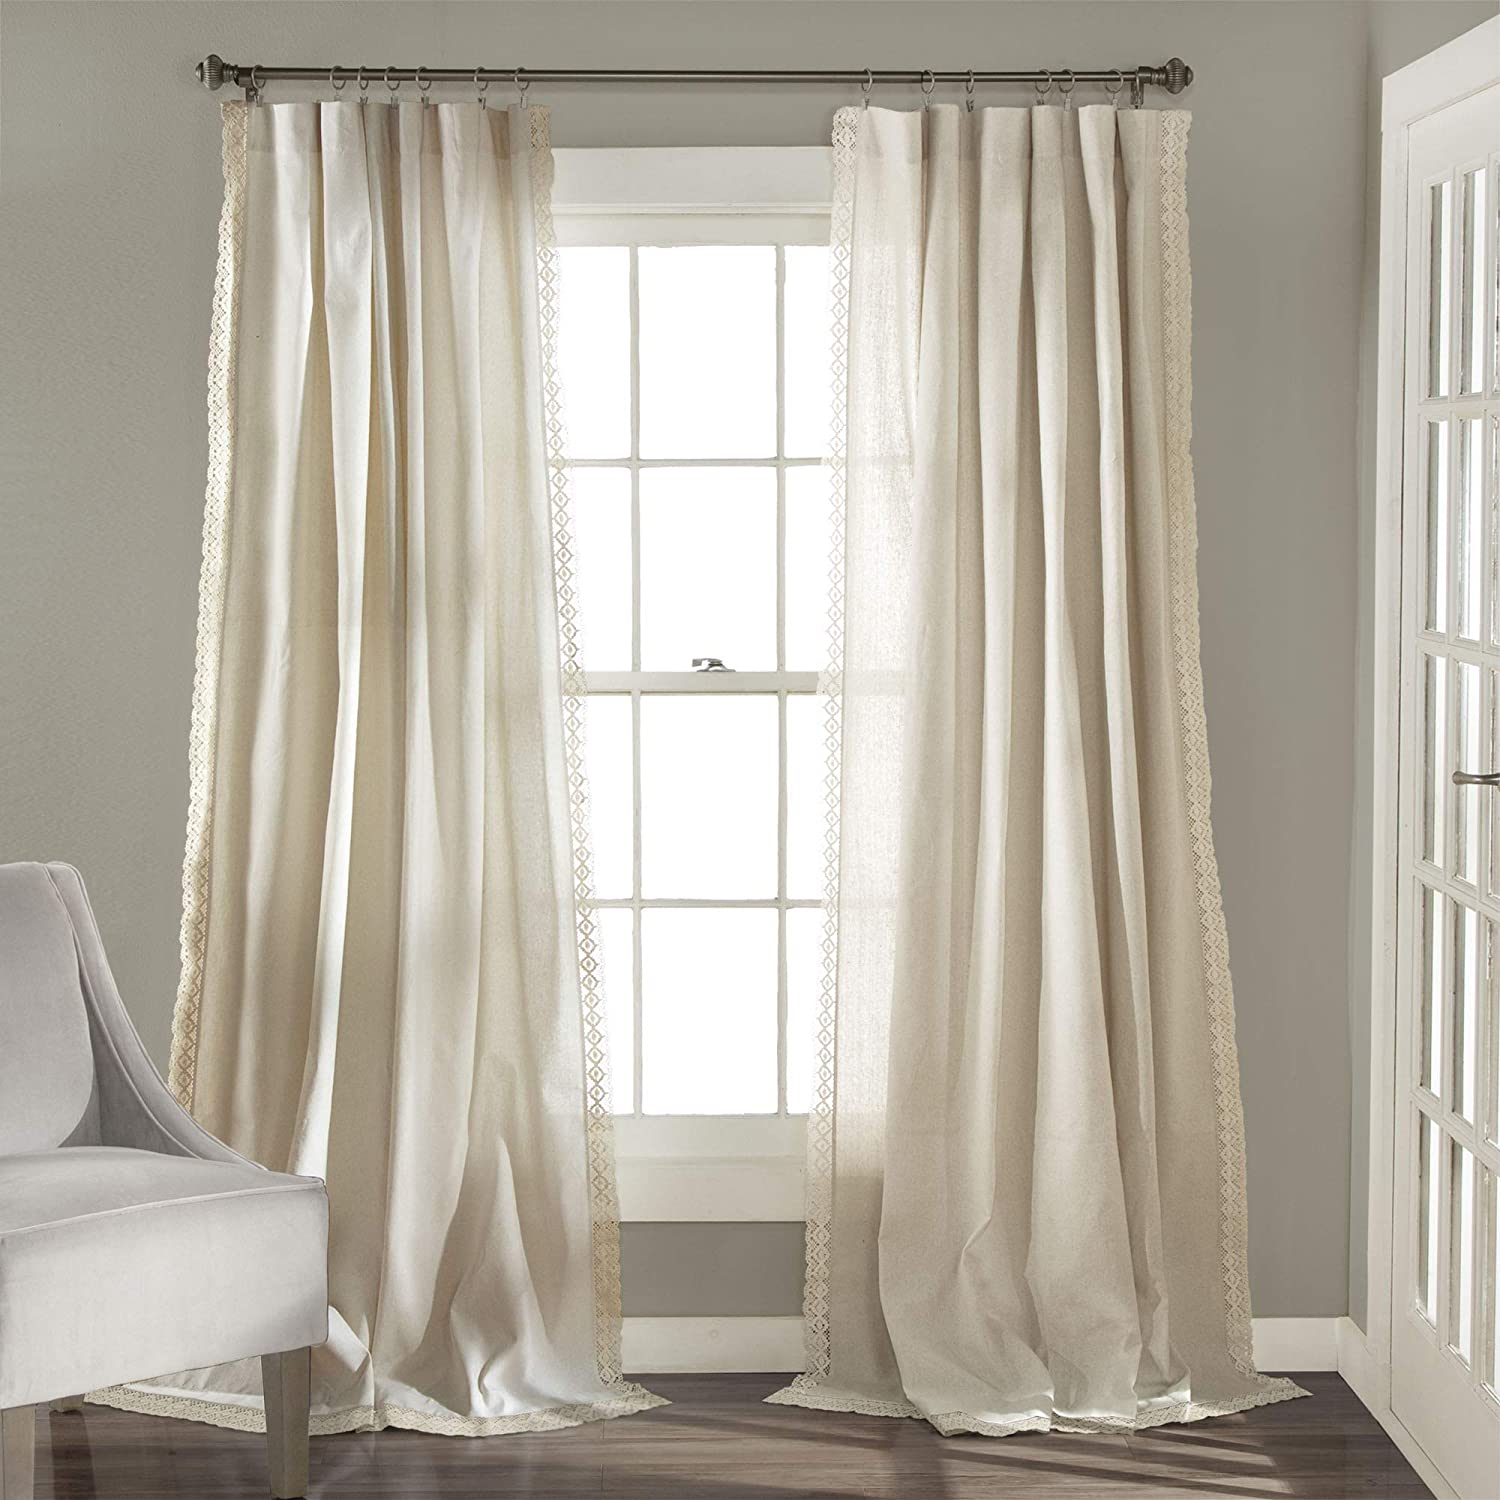 Beige Country Style Curtains